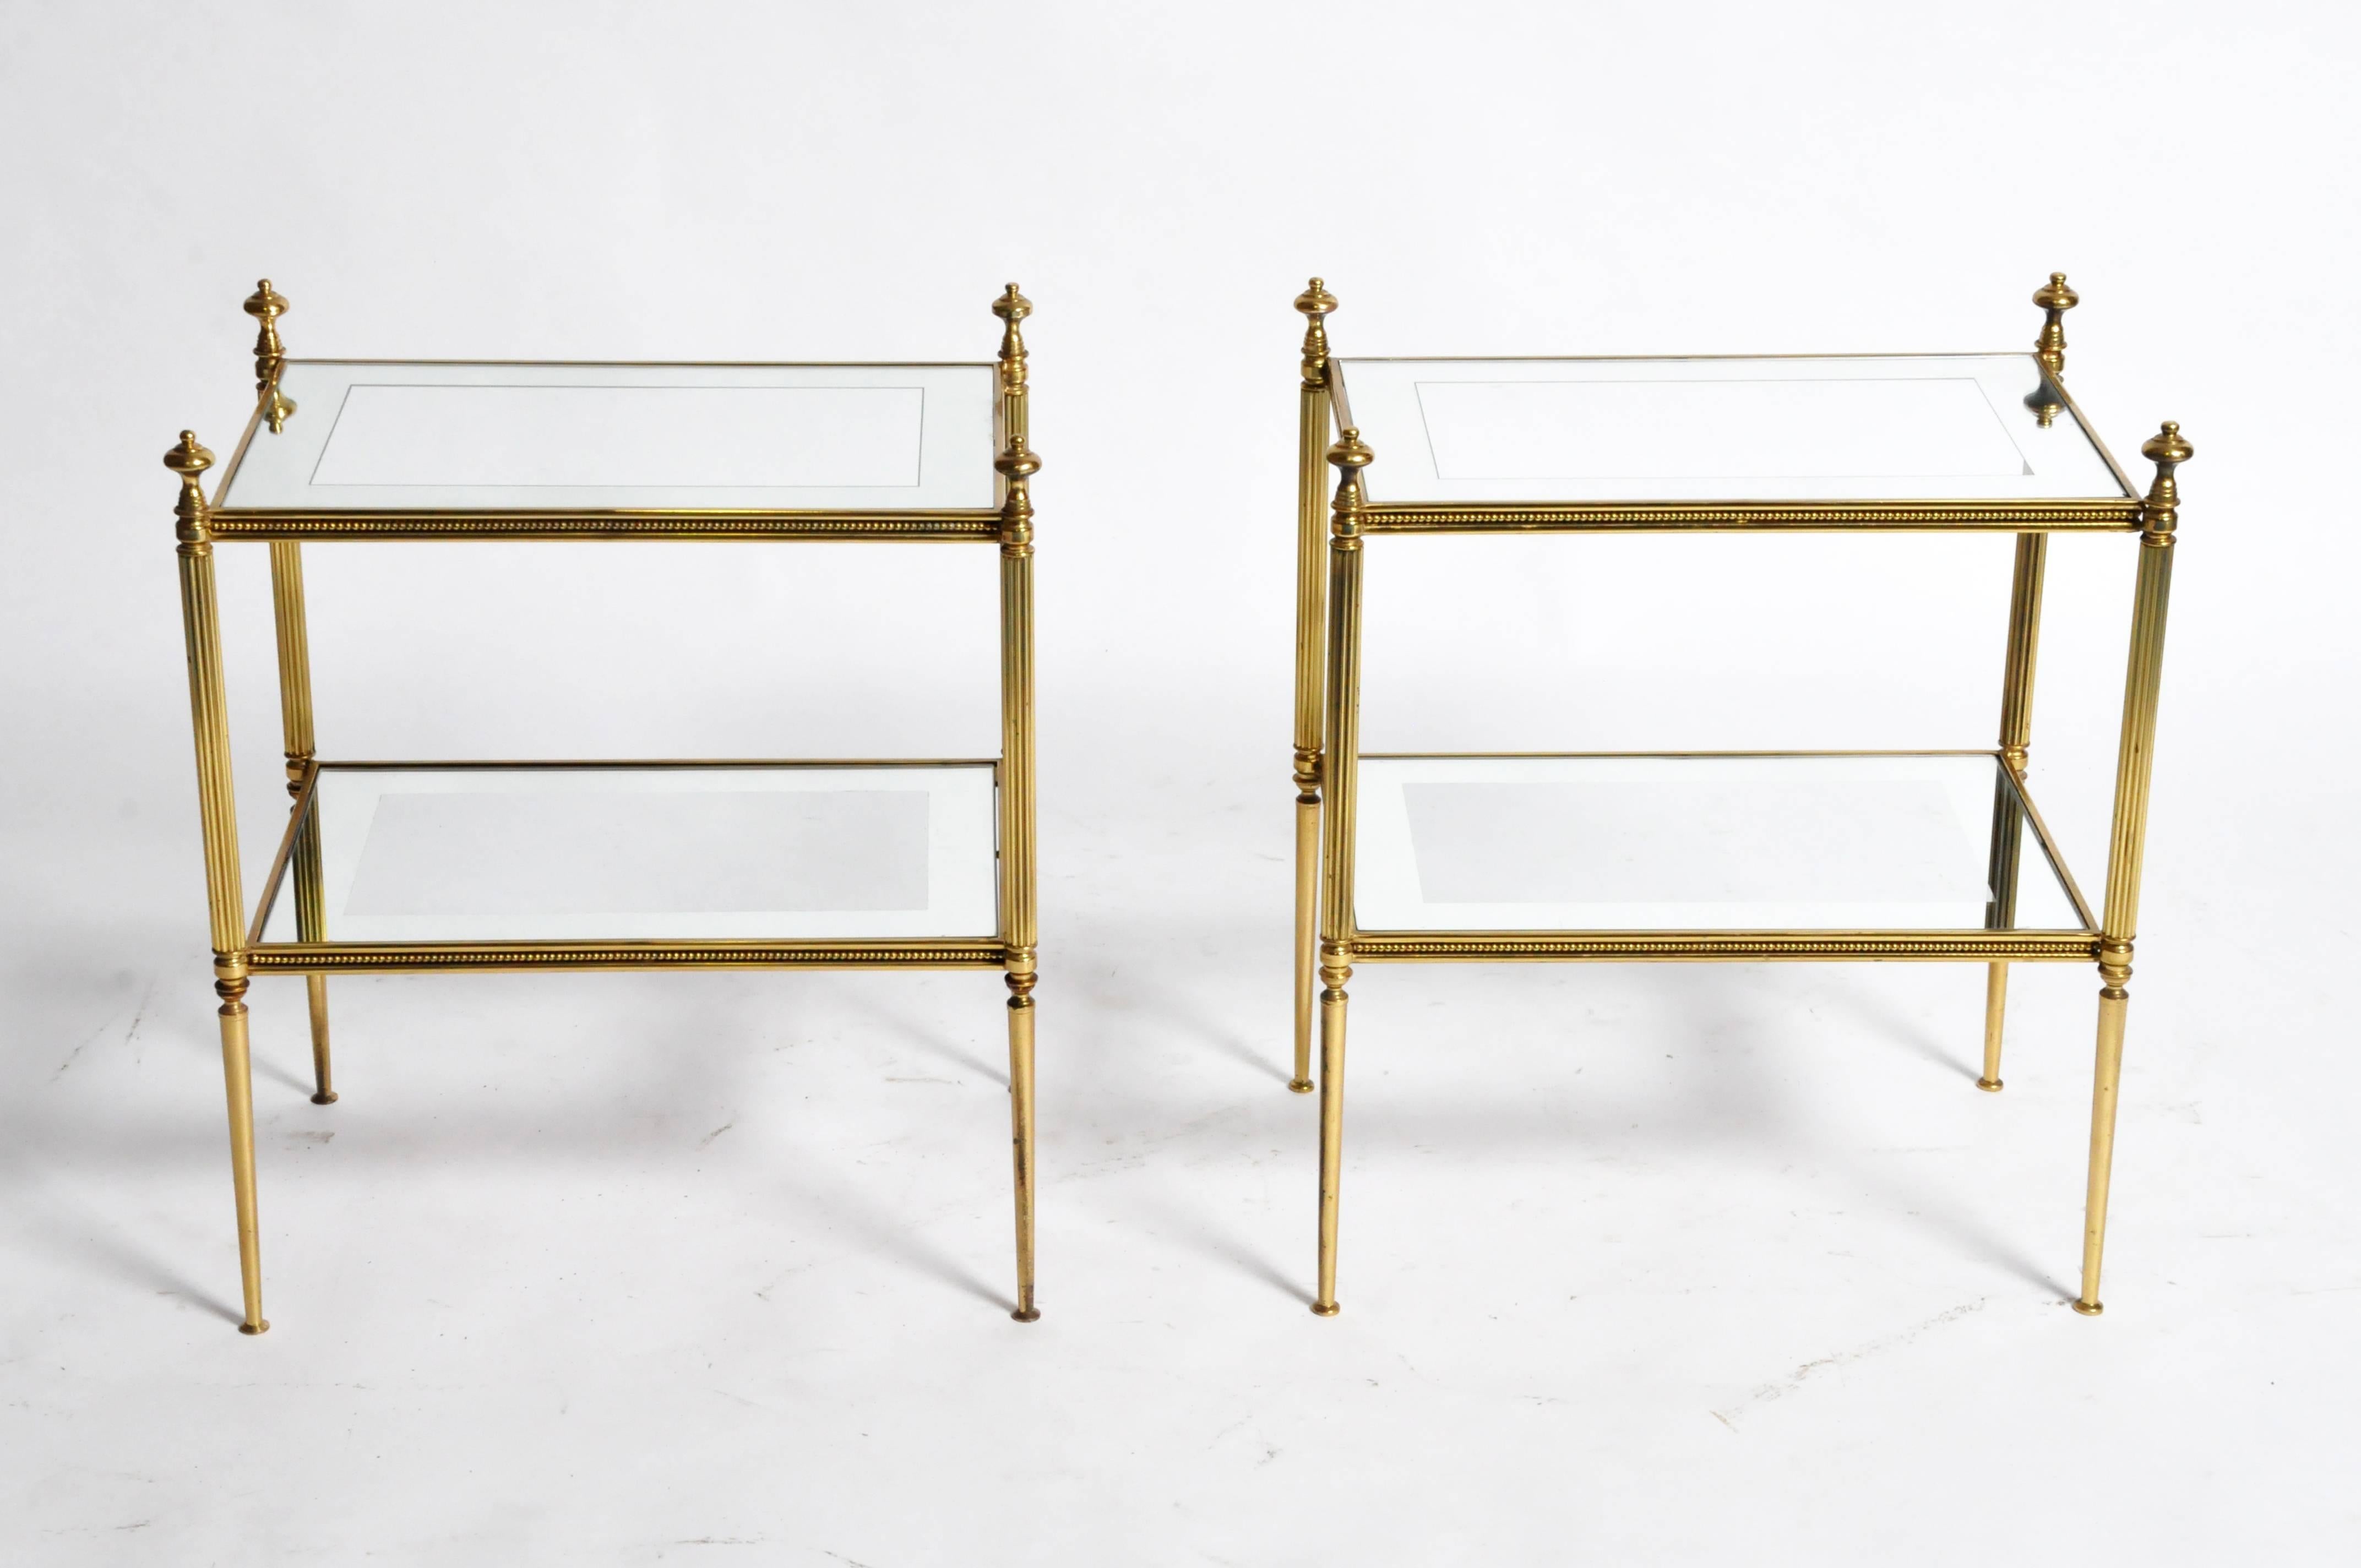 This pair of Mid-Century Modern side tables are from Paris, France and was made from brass and glass, c. 1950. The tables feature two mirrored glass shelves around the boarder of the glass. Great additions to any room in your home. 